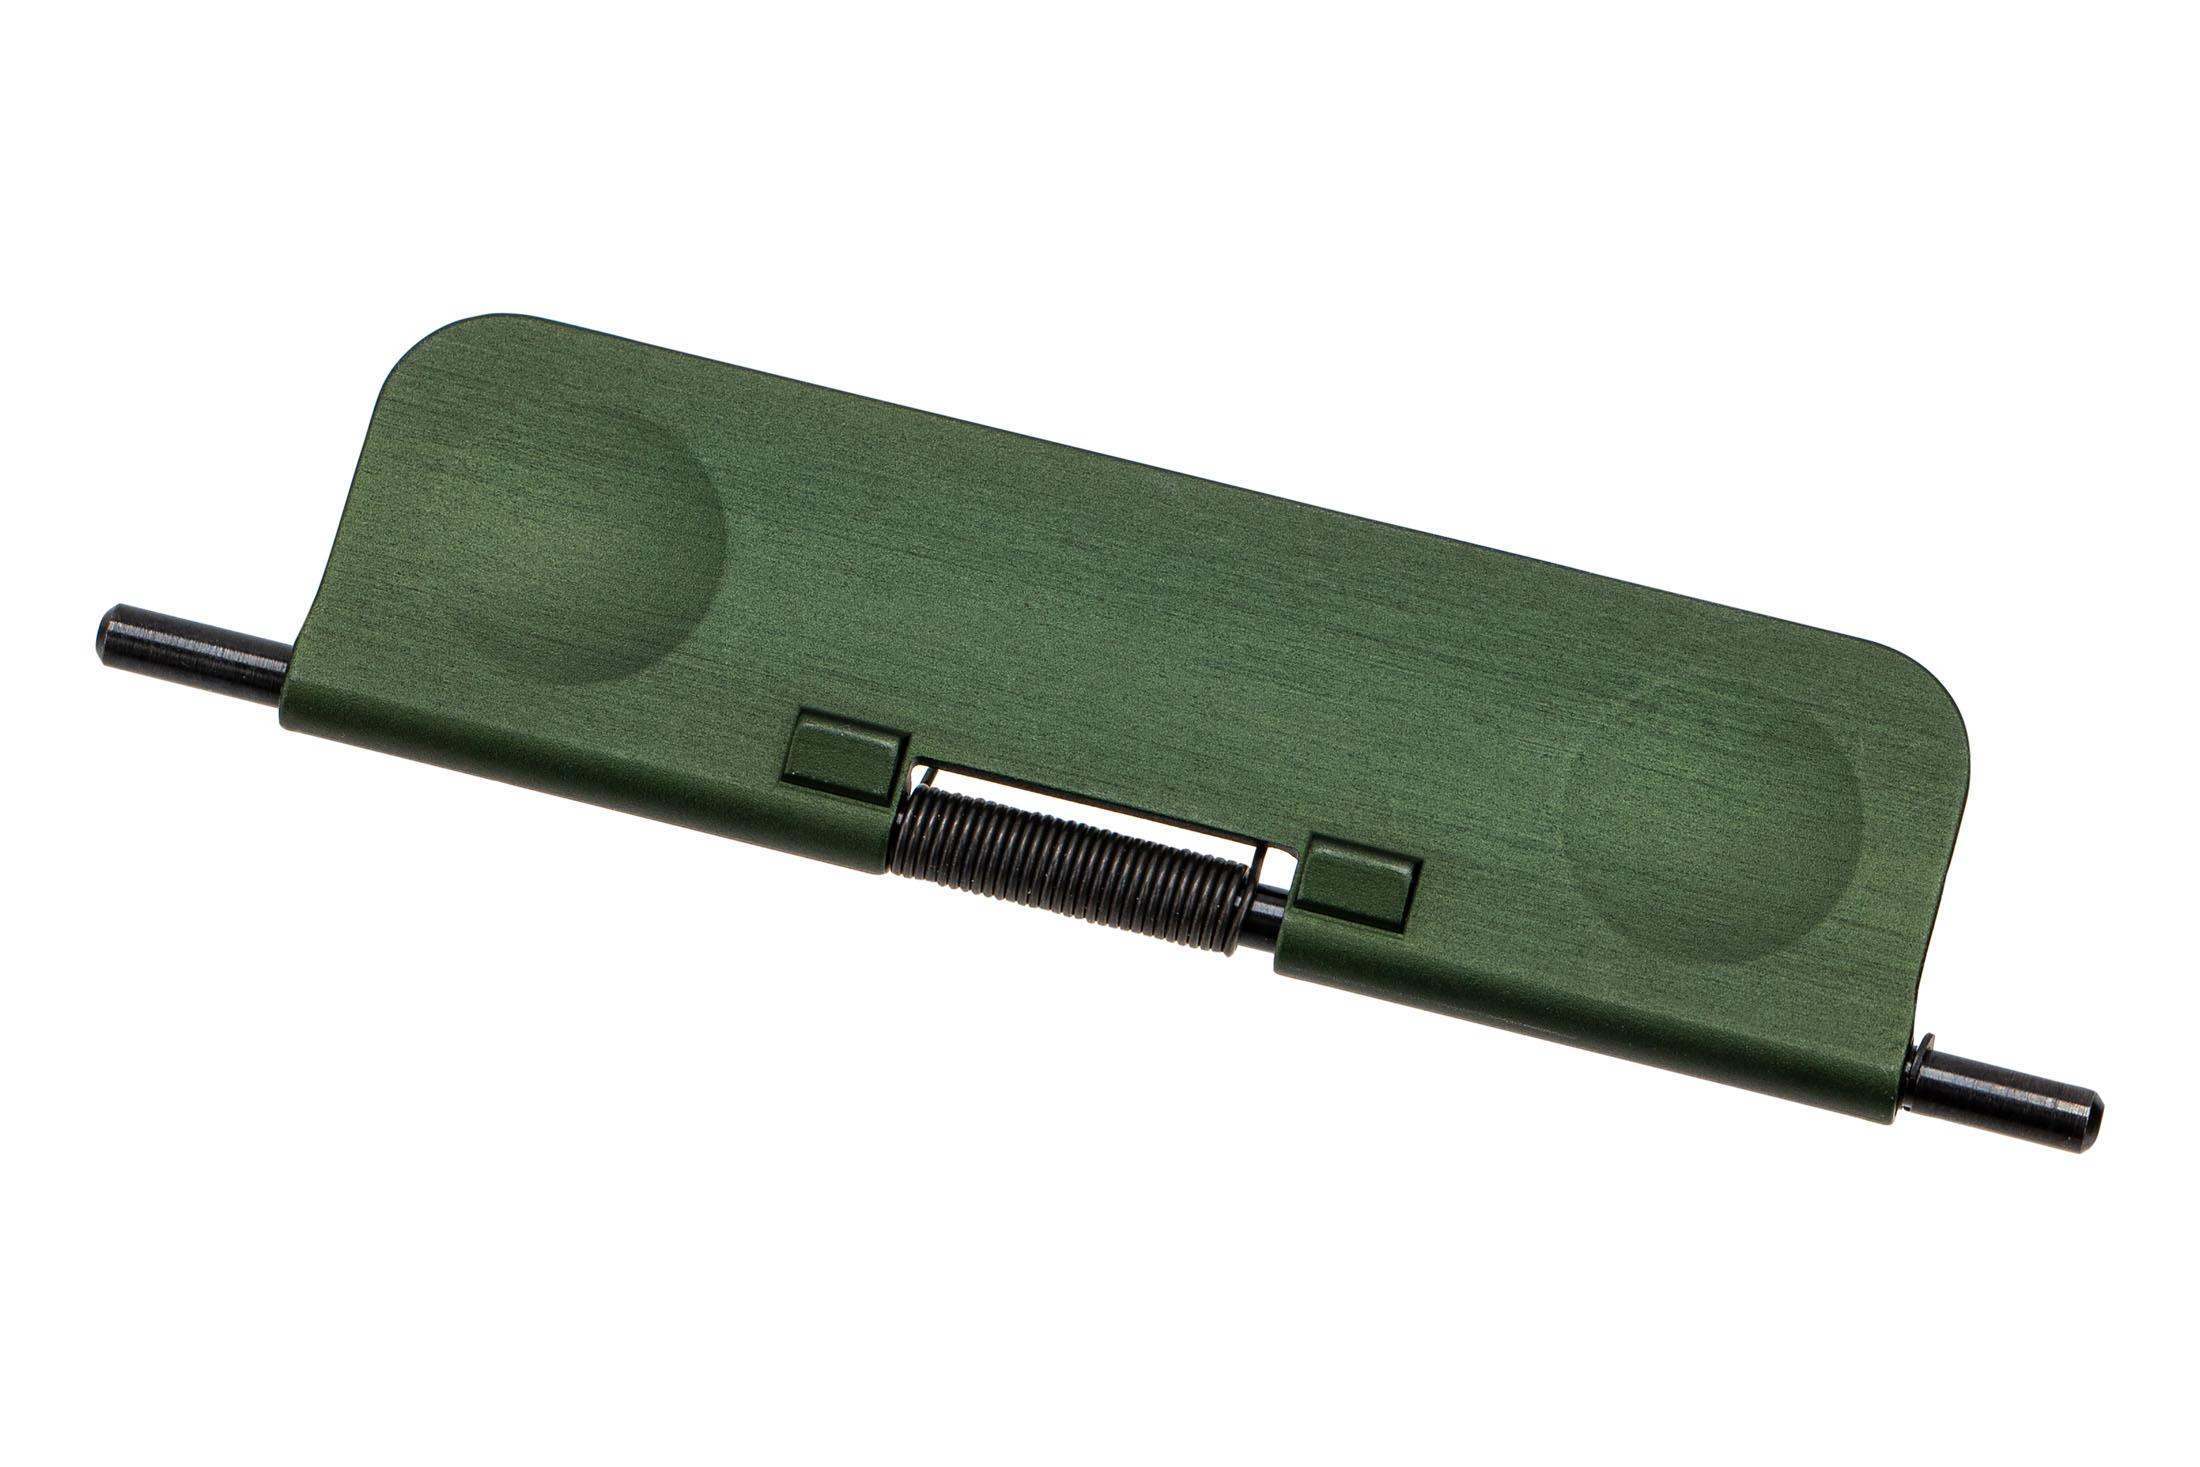 Forward Controls Design EPC AR Ejection Port Cover   OD Green